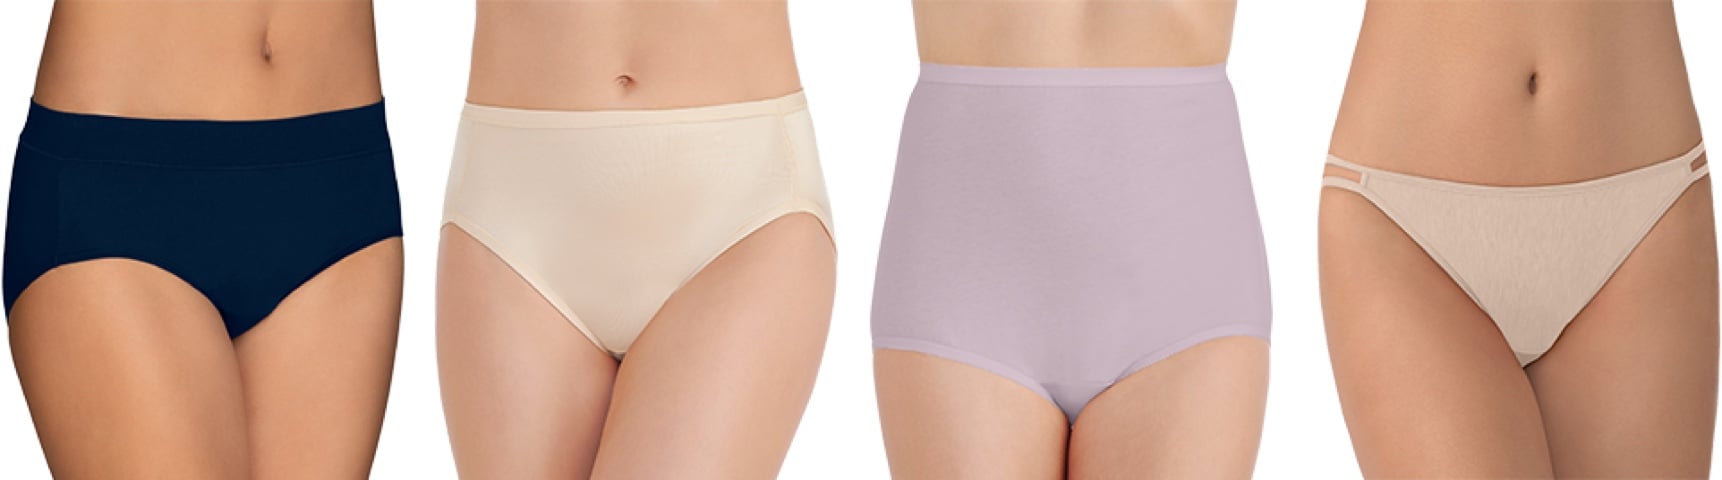 The Underwear Revolution: Comfy Undies for the Perfect Feel-Good